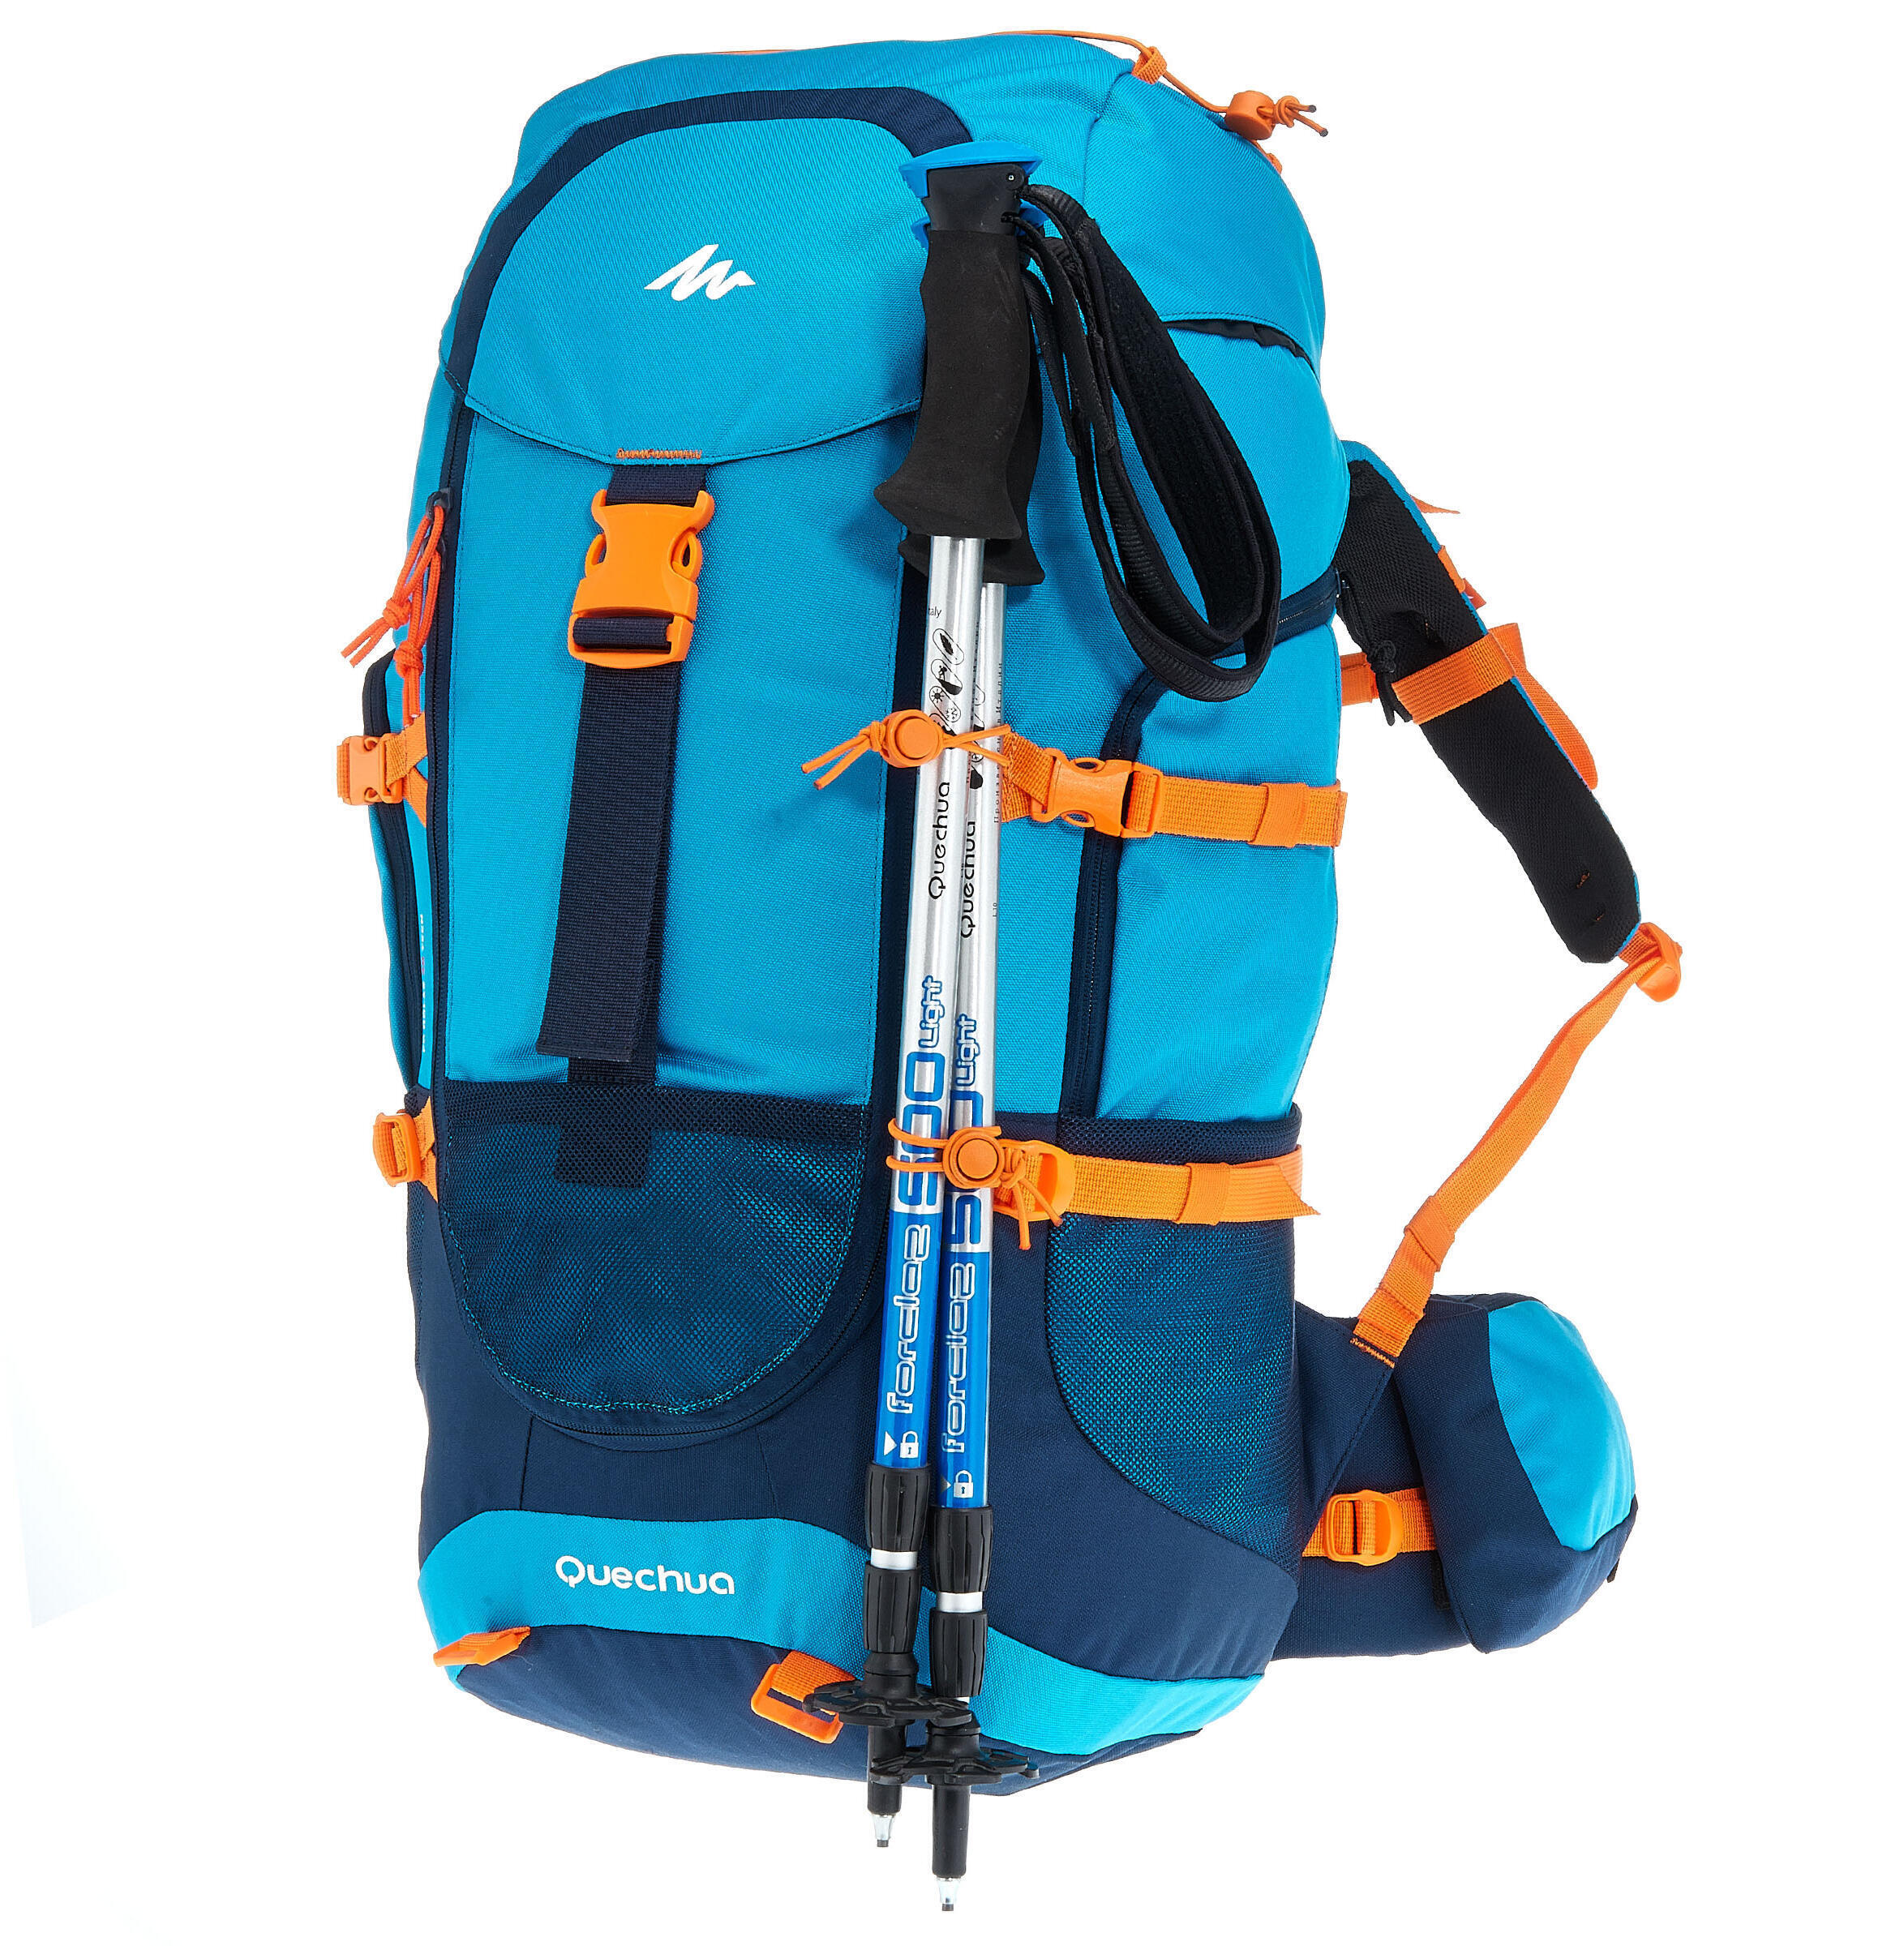 Where can I attach my A300 poles on my backpack?